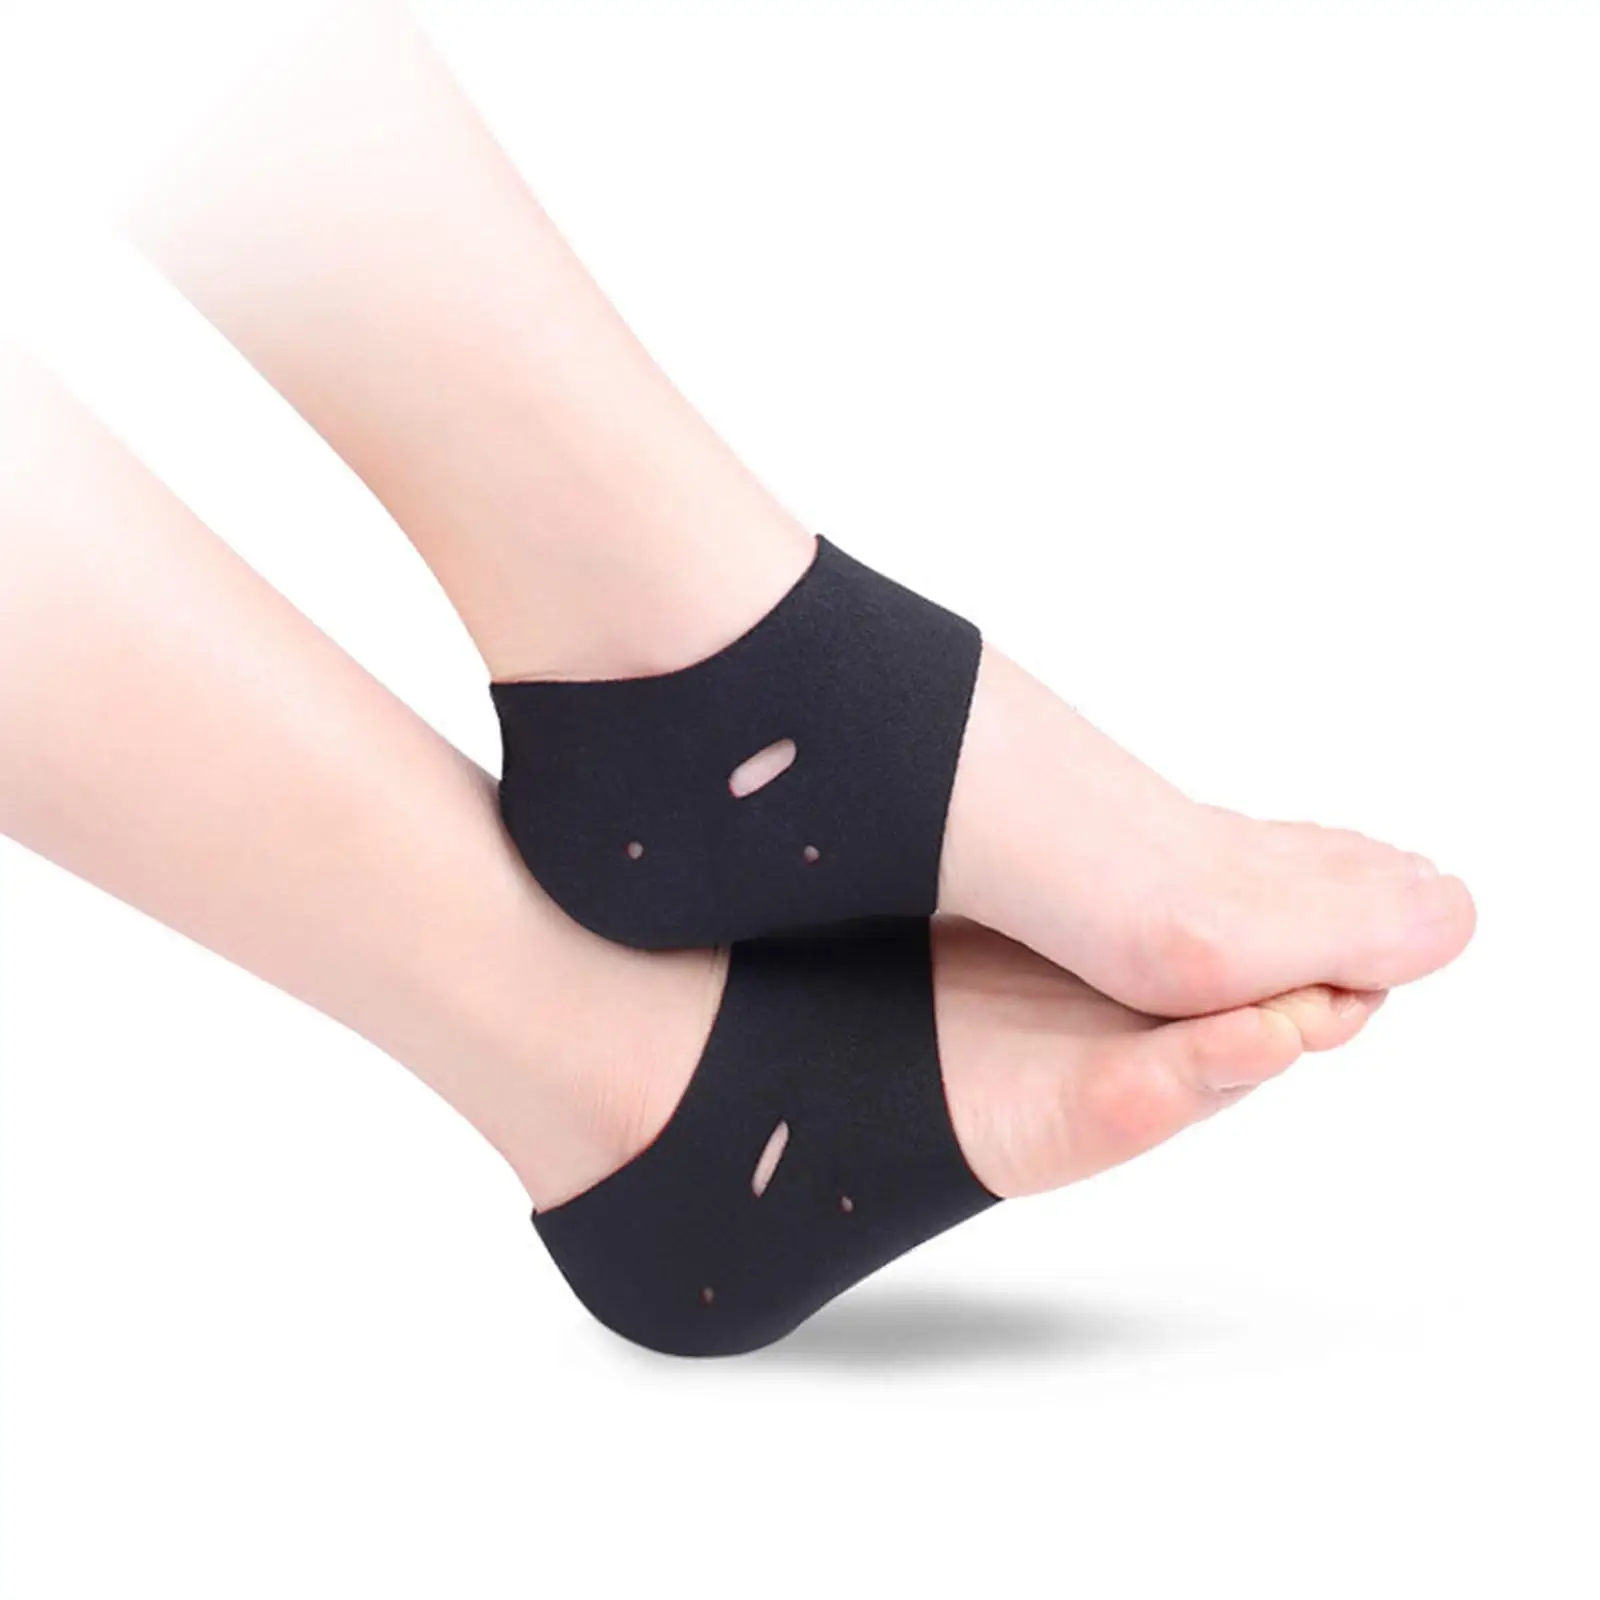   Cups, Breathable  Guard Inserts  Sleeves Pads Support for Aching Sore Repair   Pain 